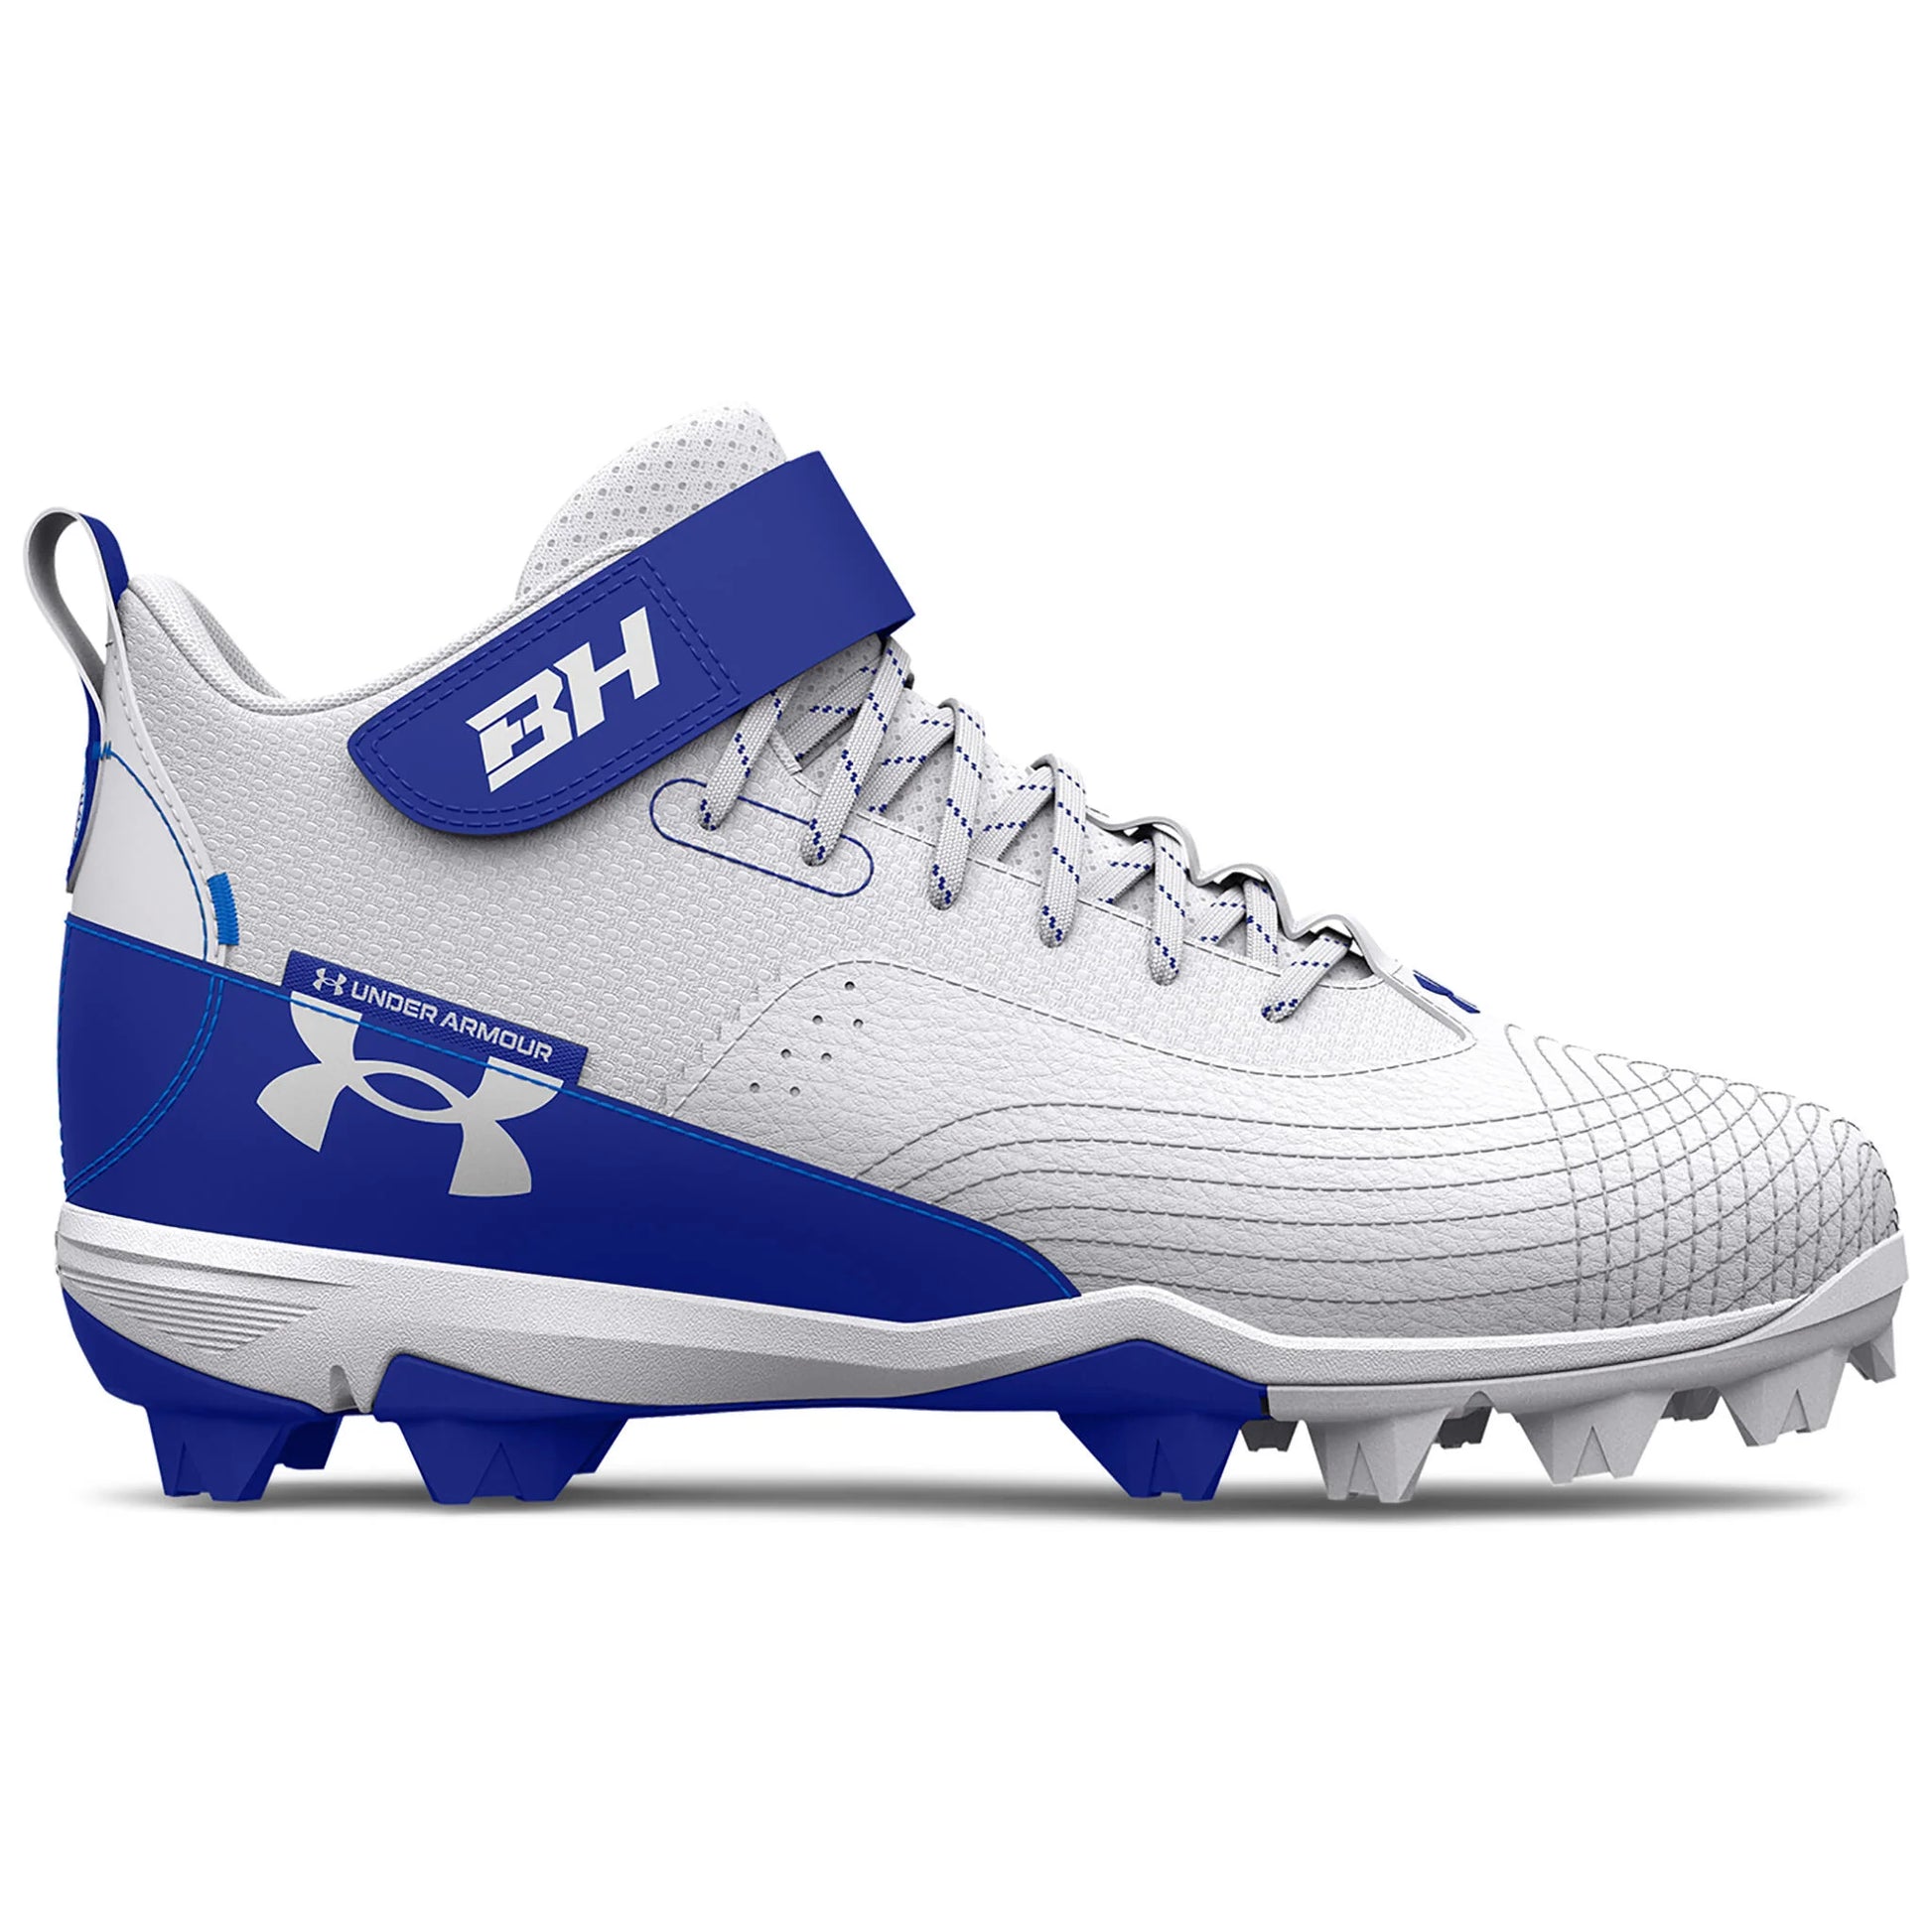 A photo of the Under Armour Harper 7 Mid RM Men's Cleats in colour white and blue side view.